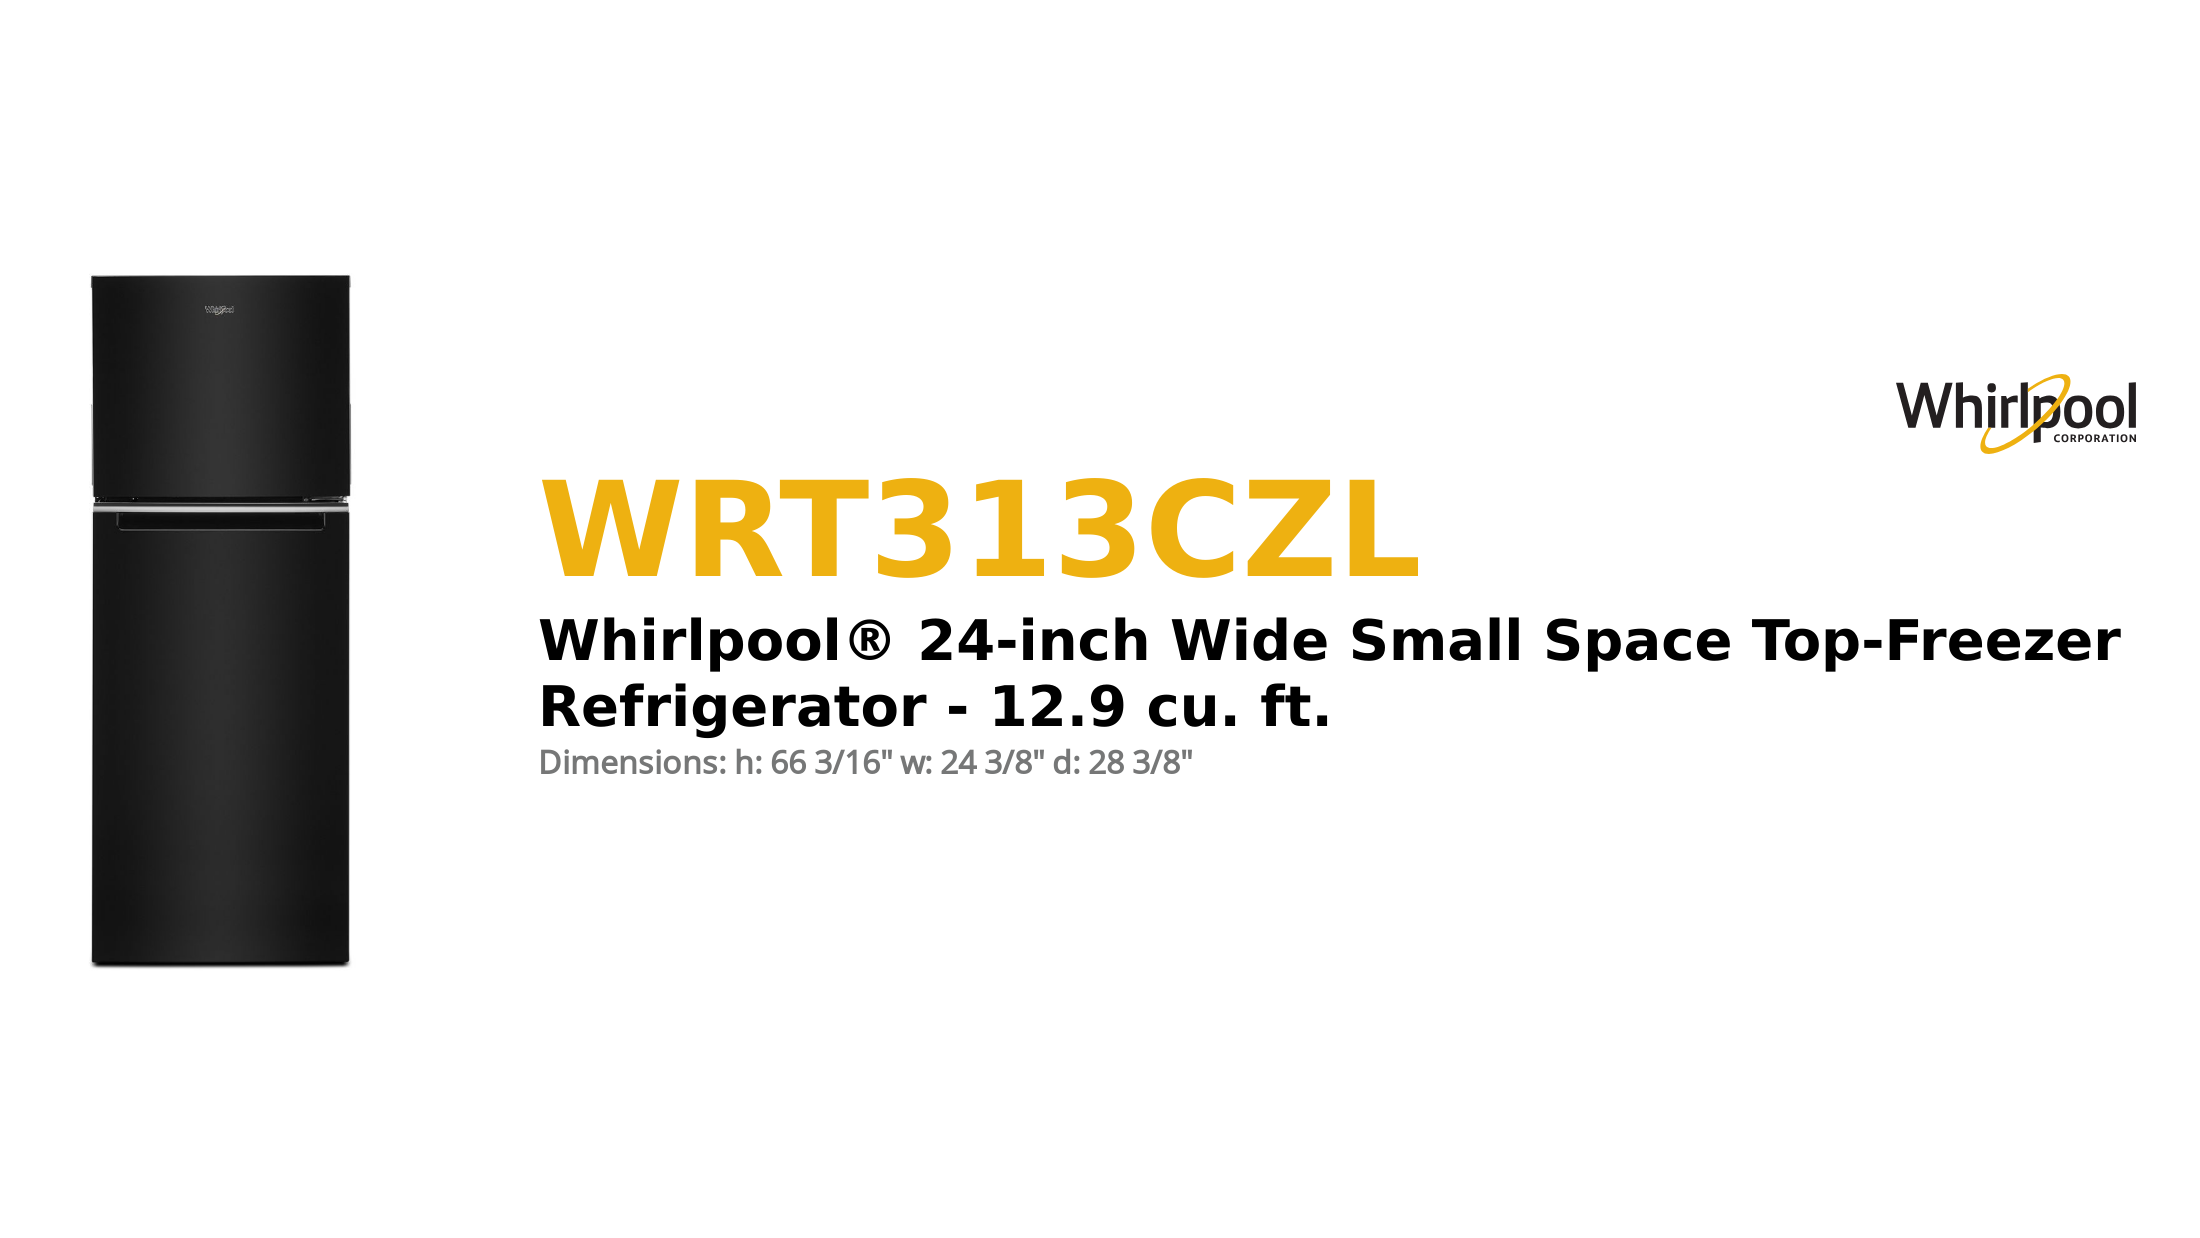 Whirlpool® 24-inch Wide Small Space Top-Freezer Refrigerator - 12.9 cu. ft.